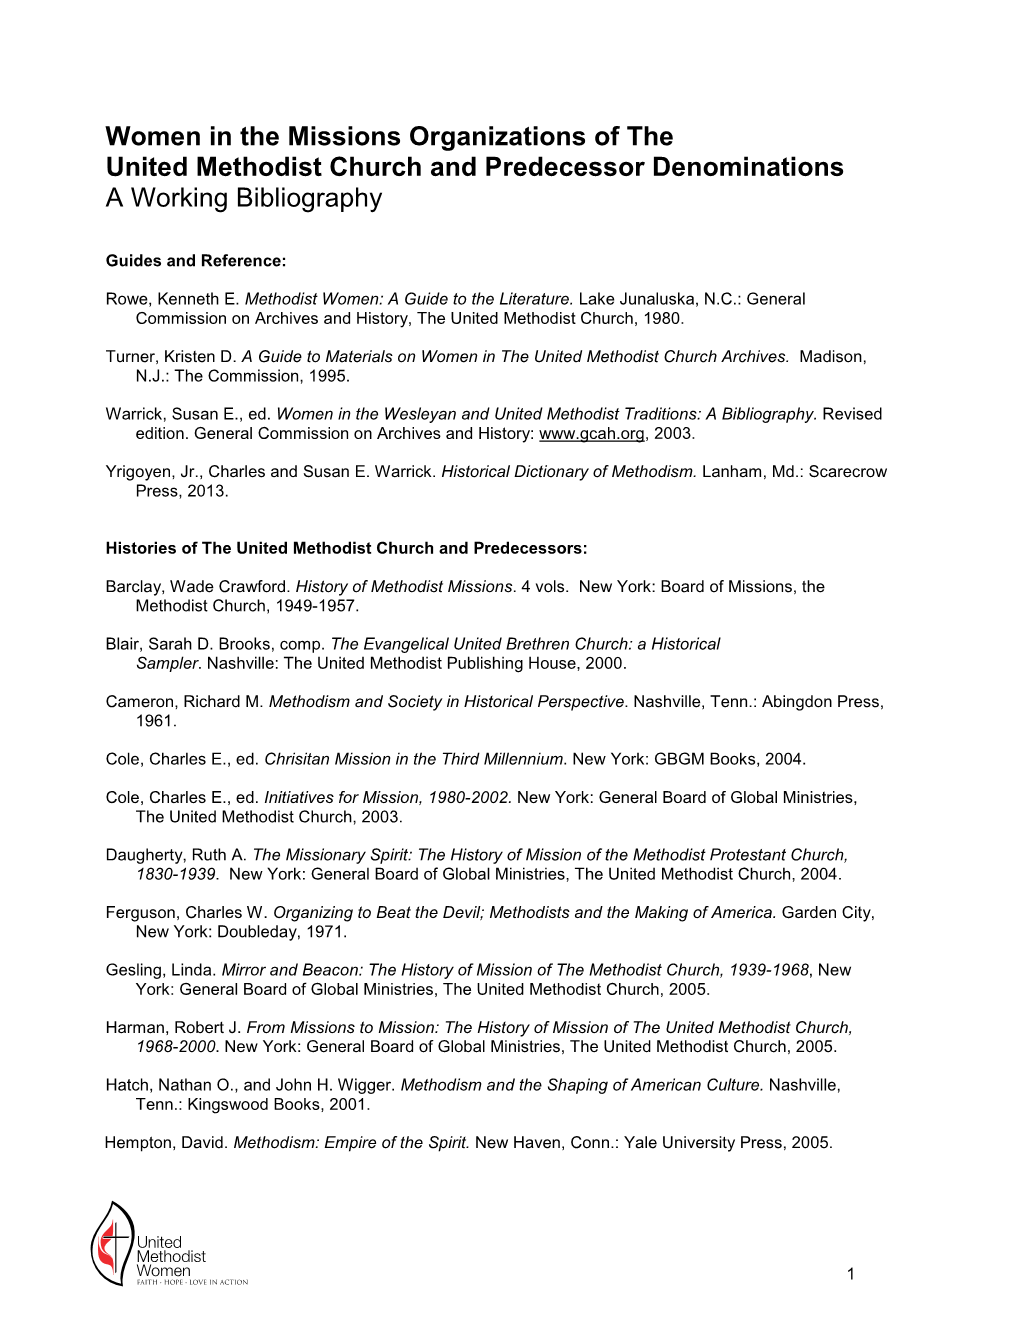 Women in the Missions Organizations of the United Methodist Church and Predecessor Denominations a Working Bibliography